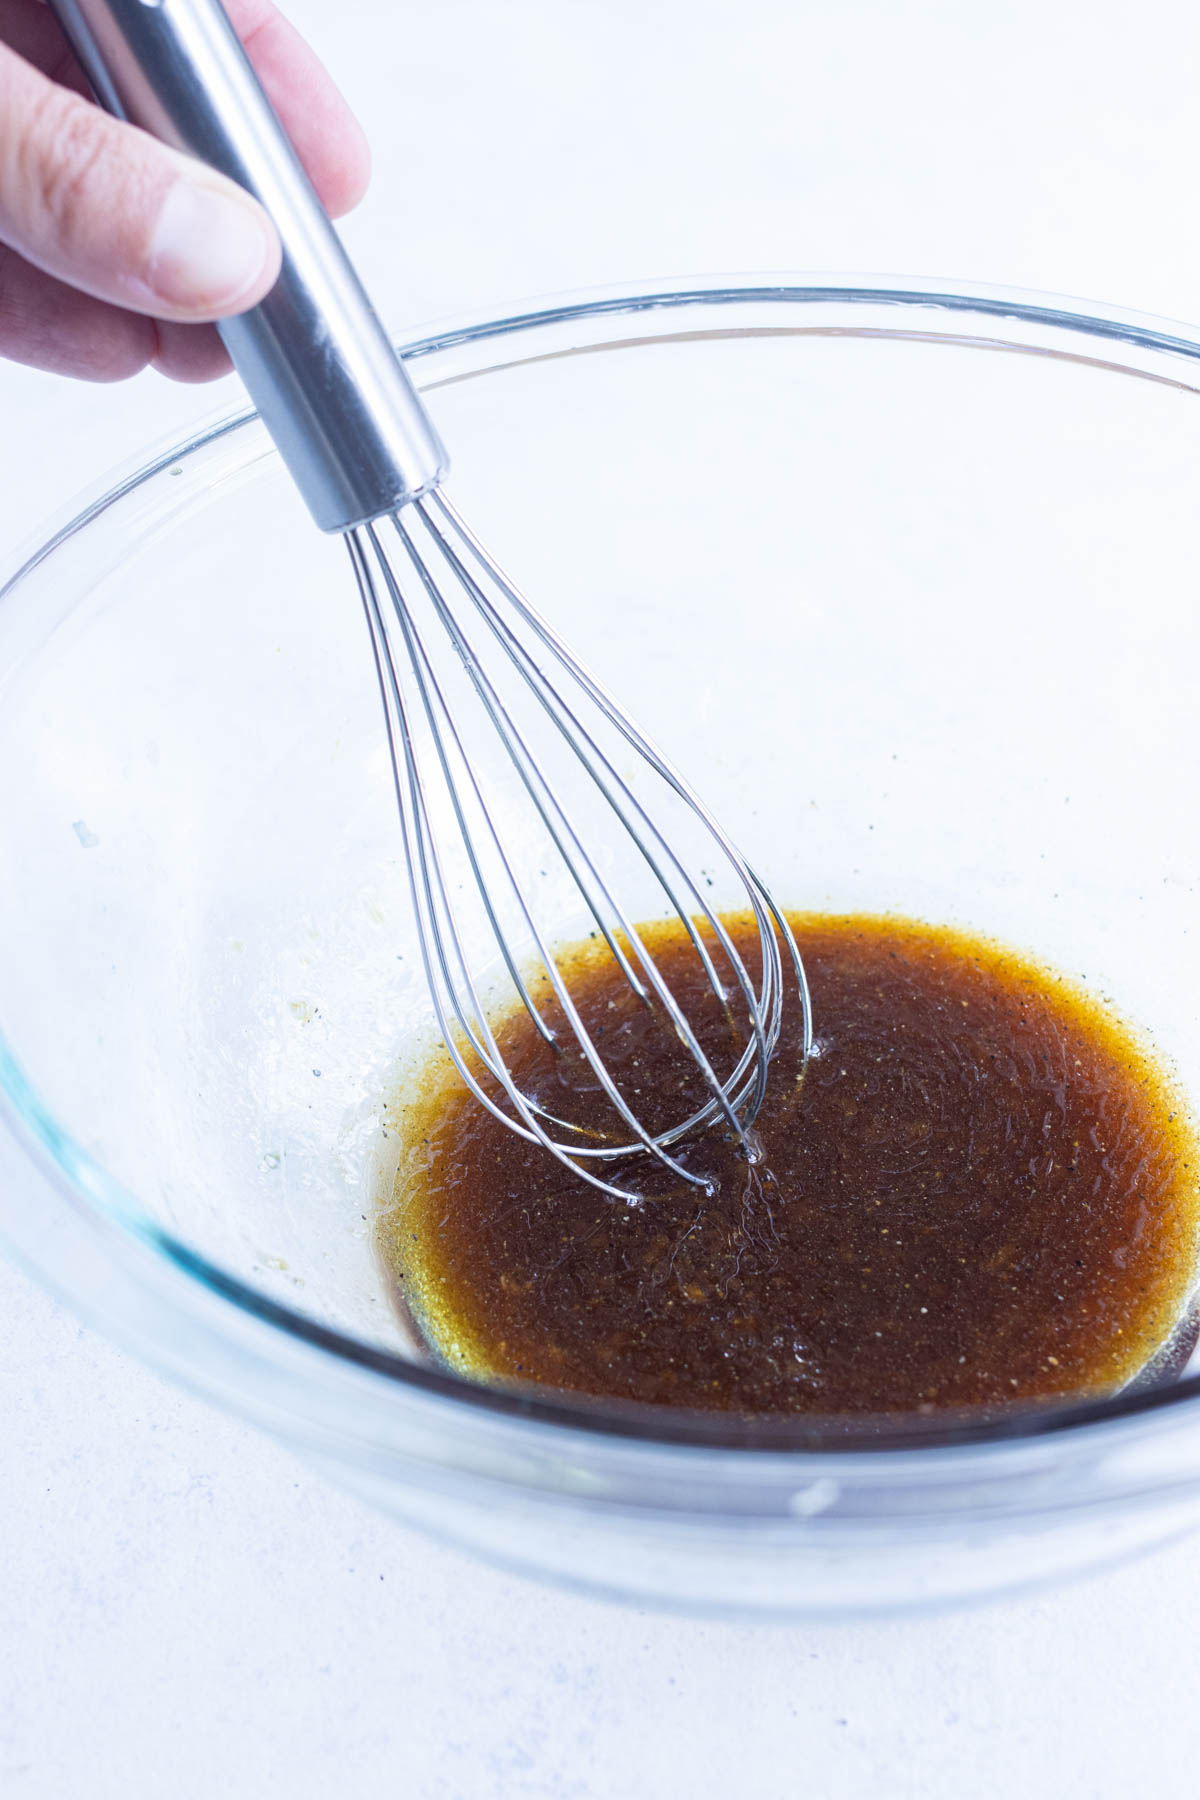 A marinade is whisked in a glass bowl.